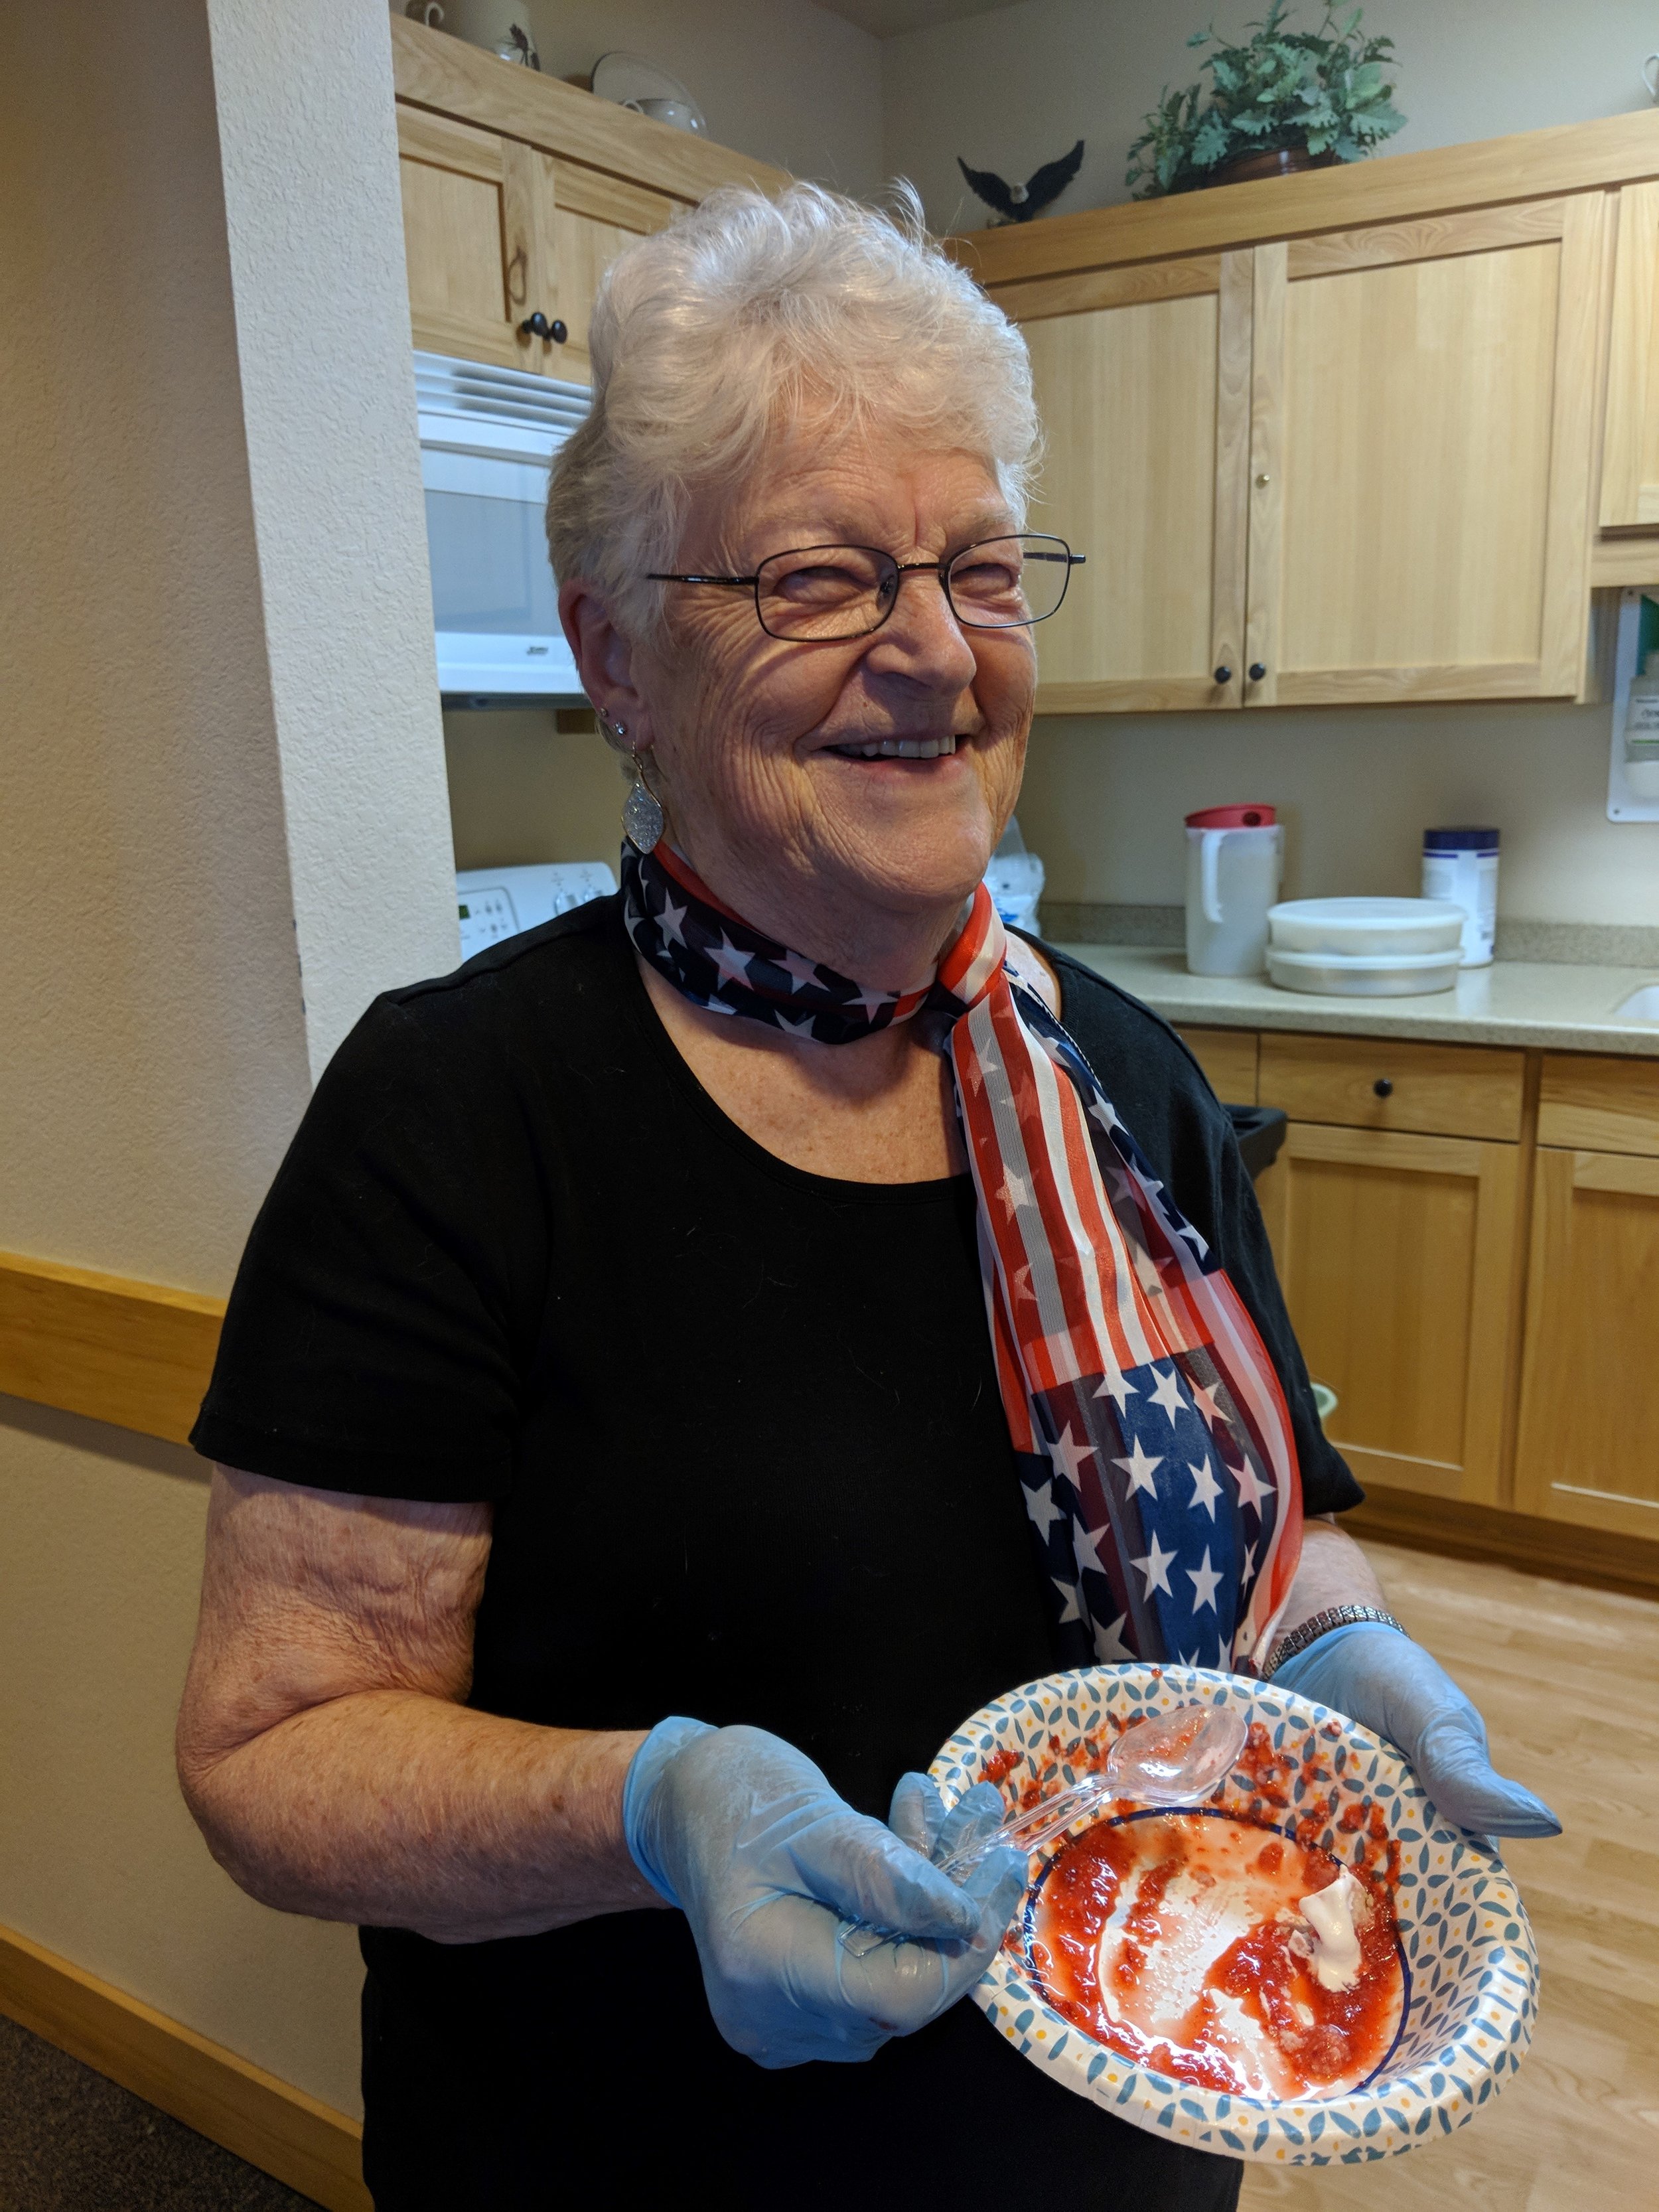 Strawberry Shortcake Family Social!! Free will donations were given towards the Alzheimer's Association. Thank you to everyone who came out and enjoyed this delicious treat for a great cause ❤️! 4.jpg